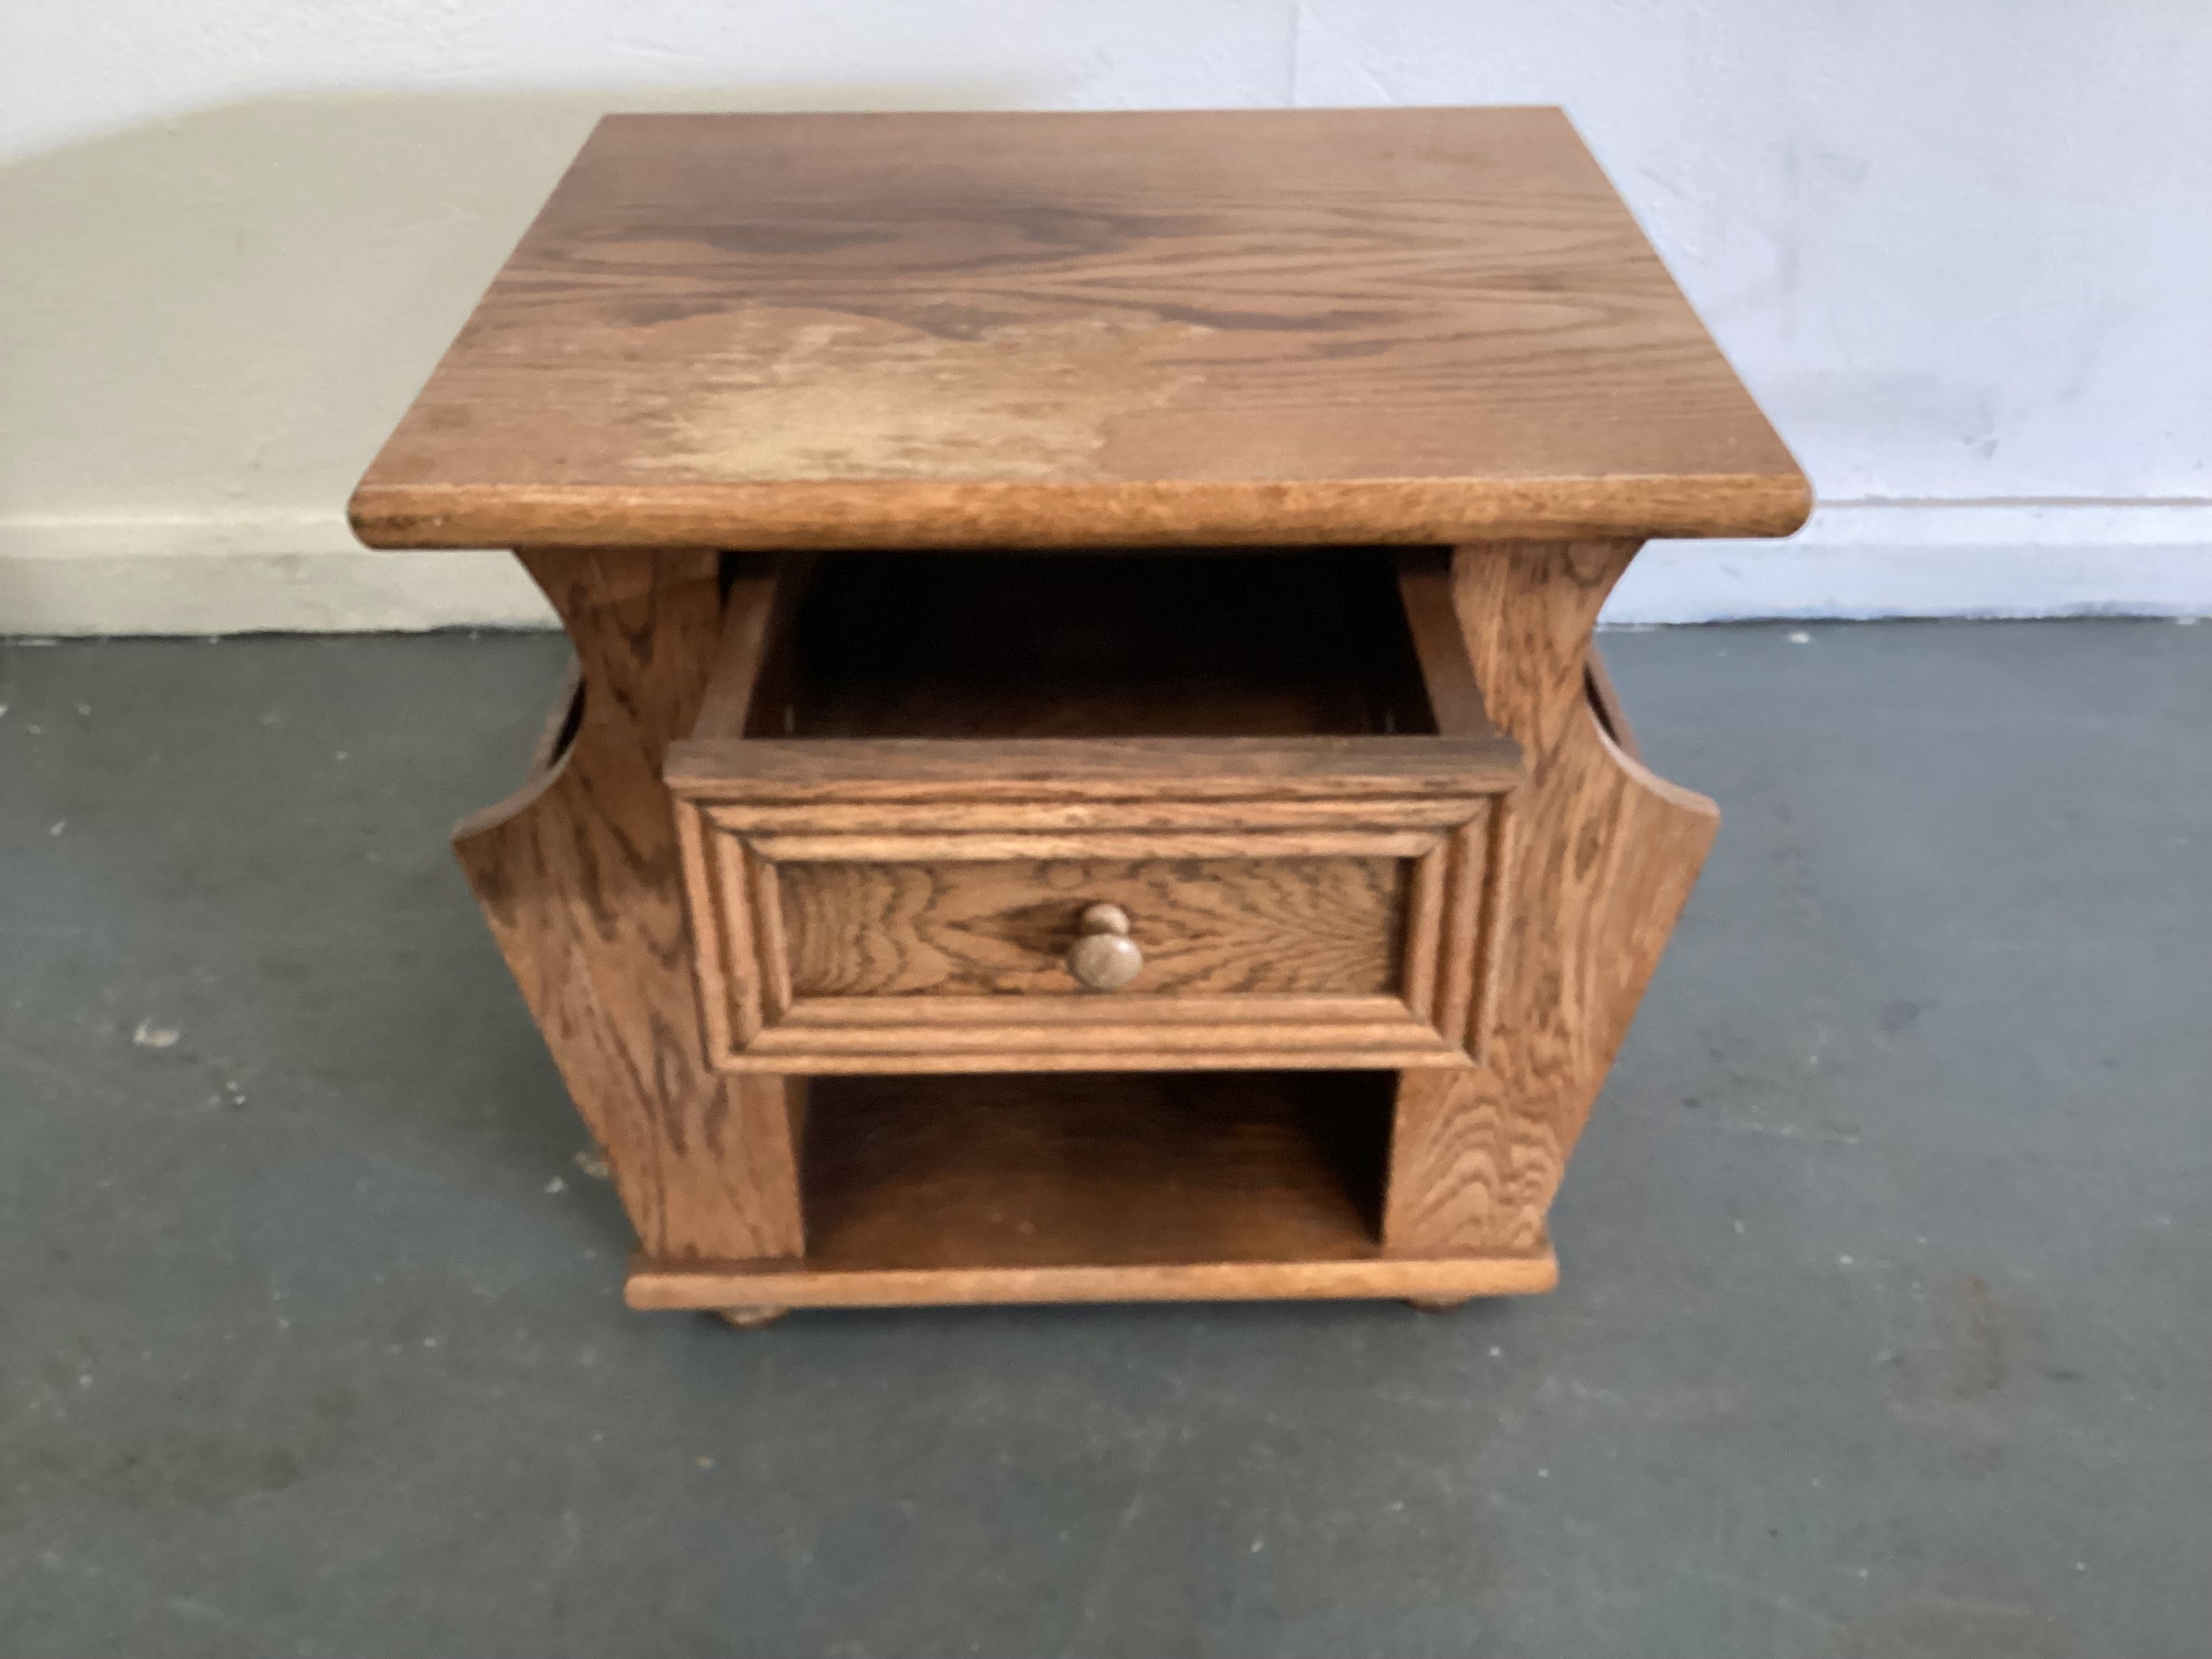    Wooden Sidetable